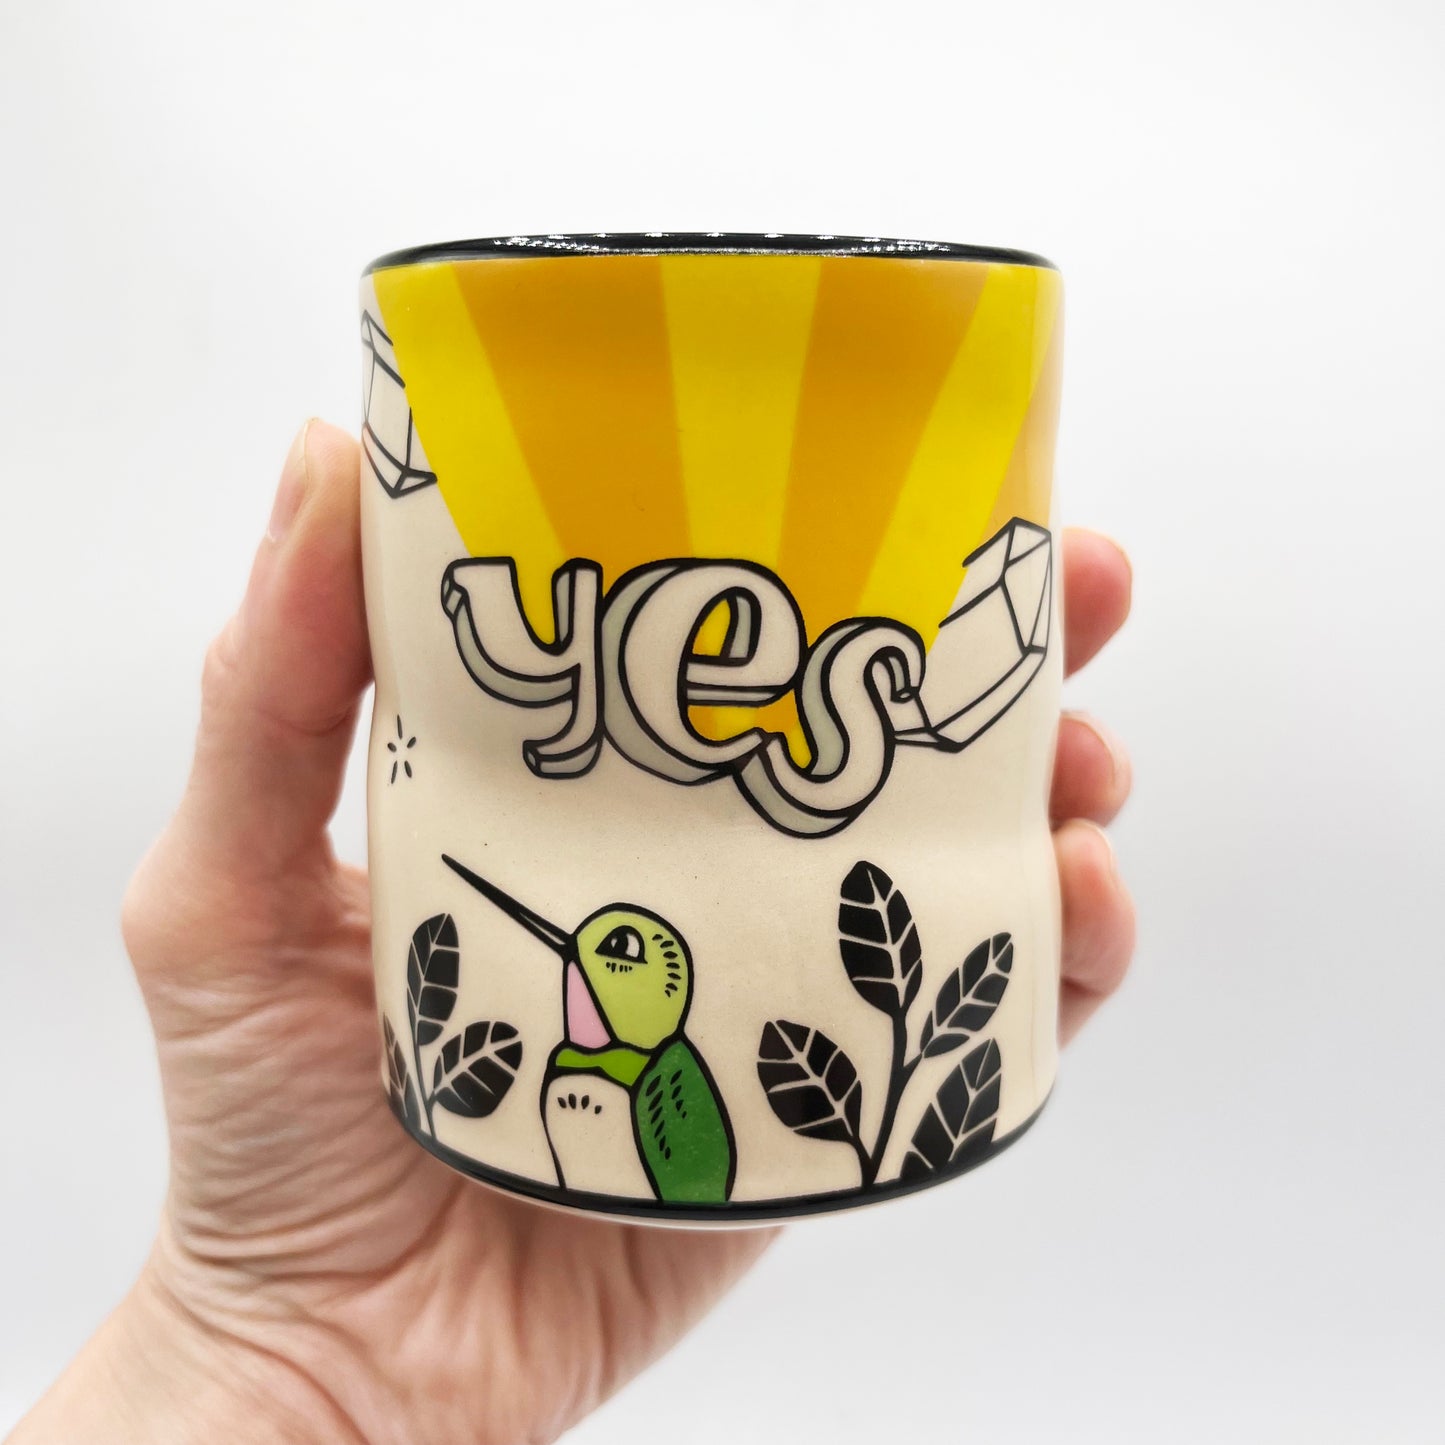 Yes Dragon Spark Cup - Large